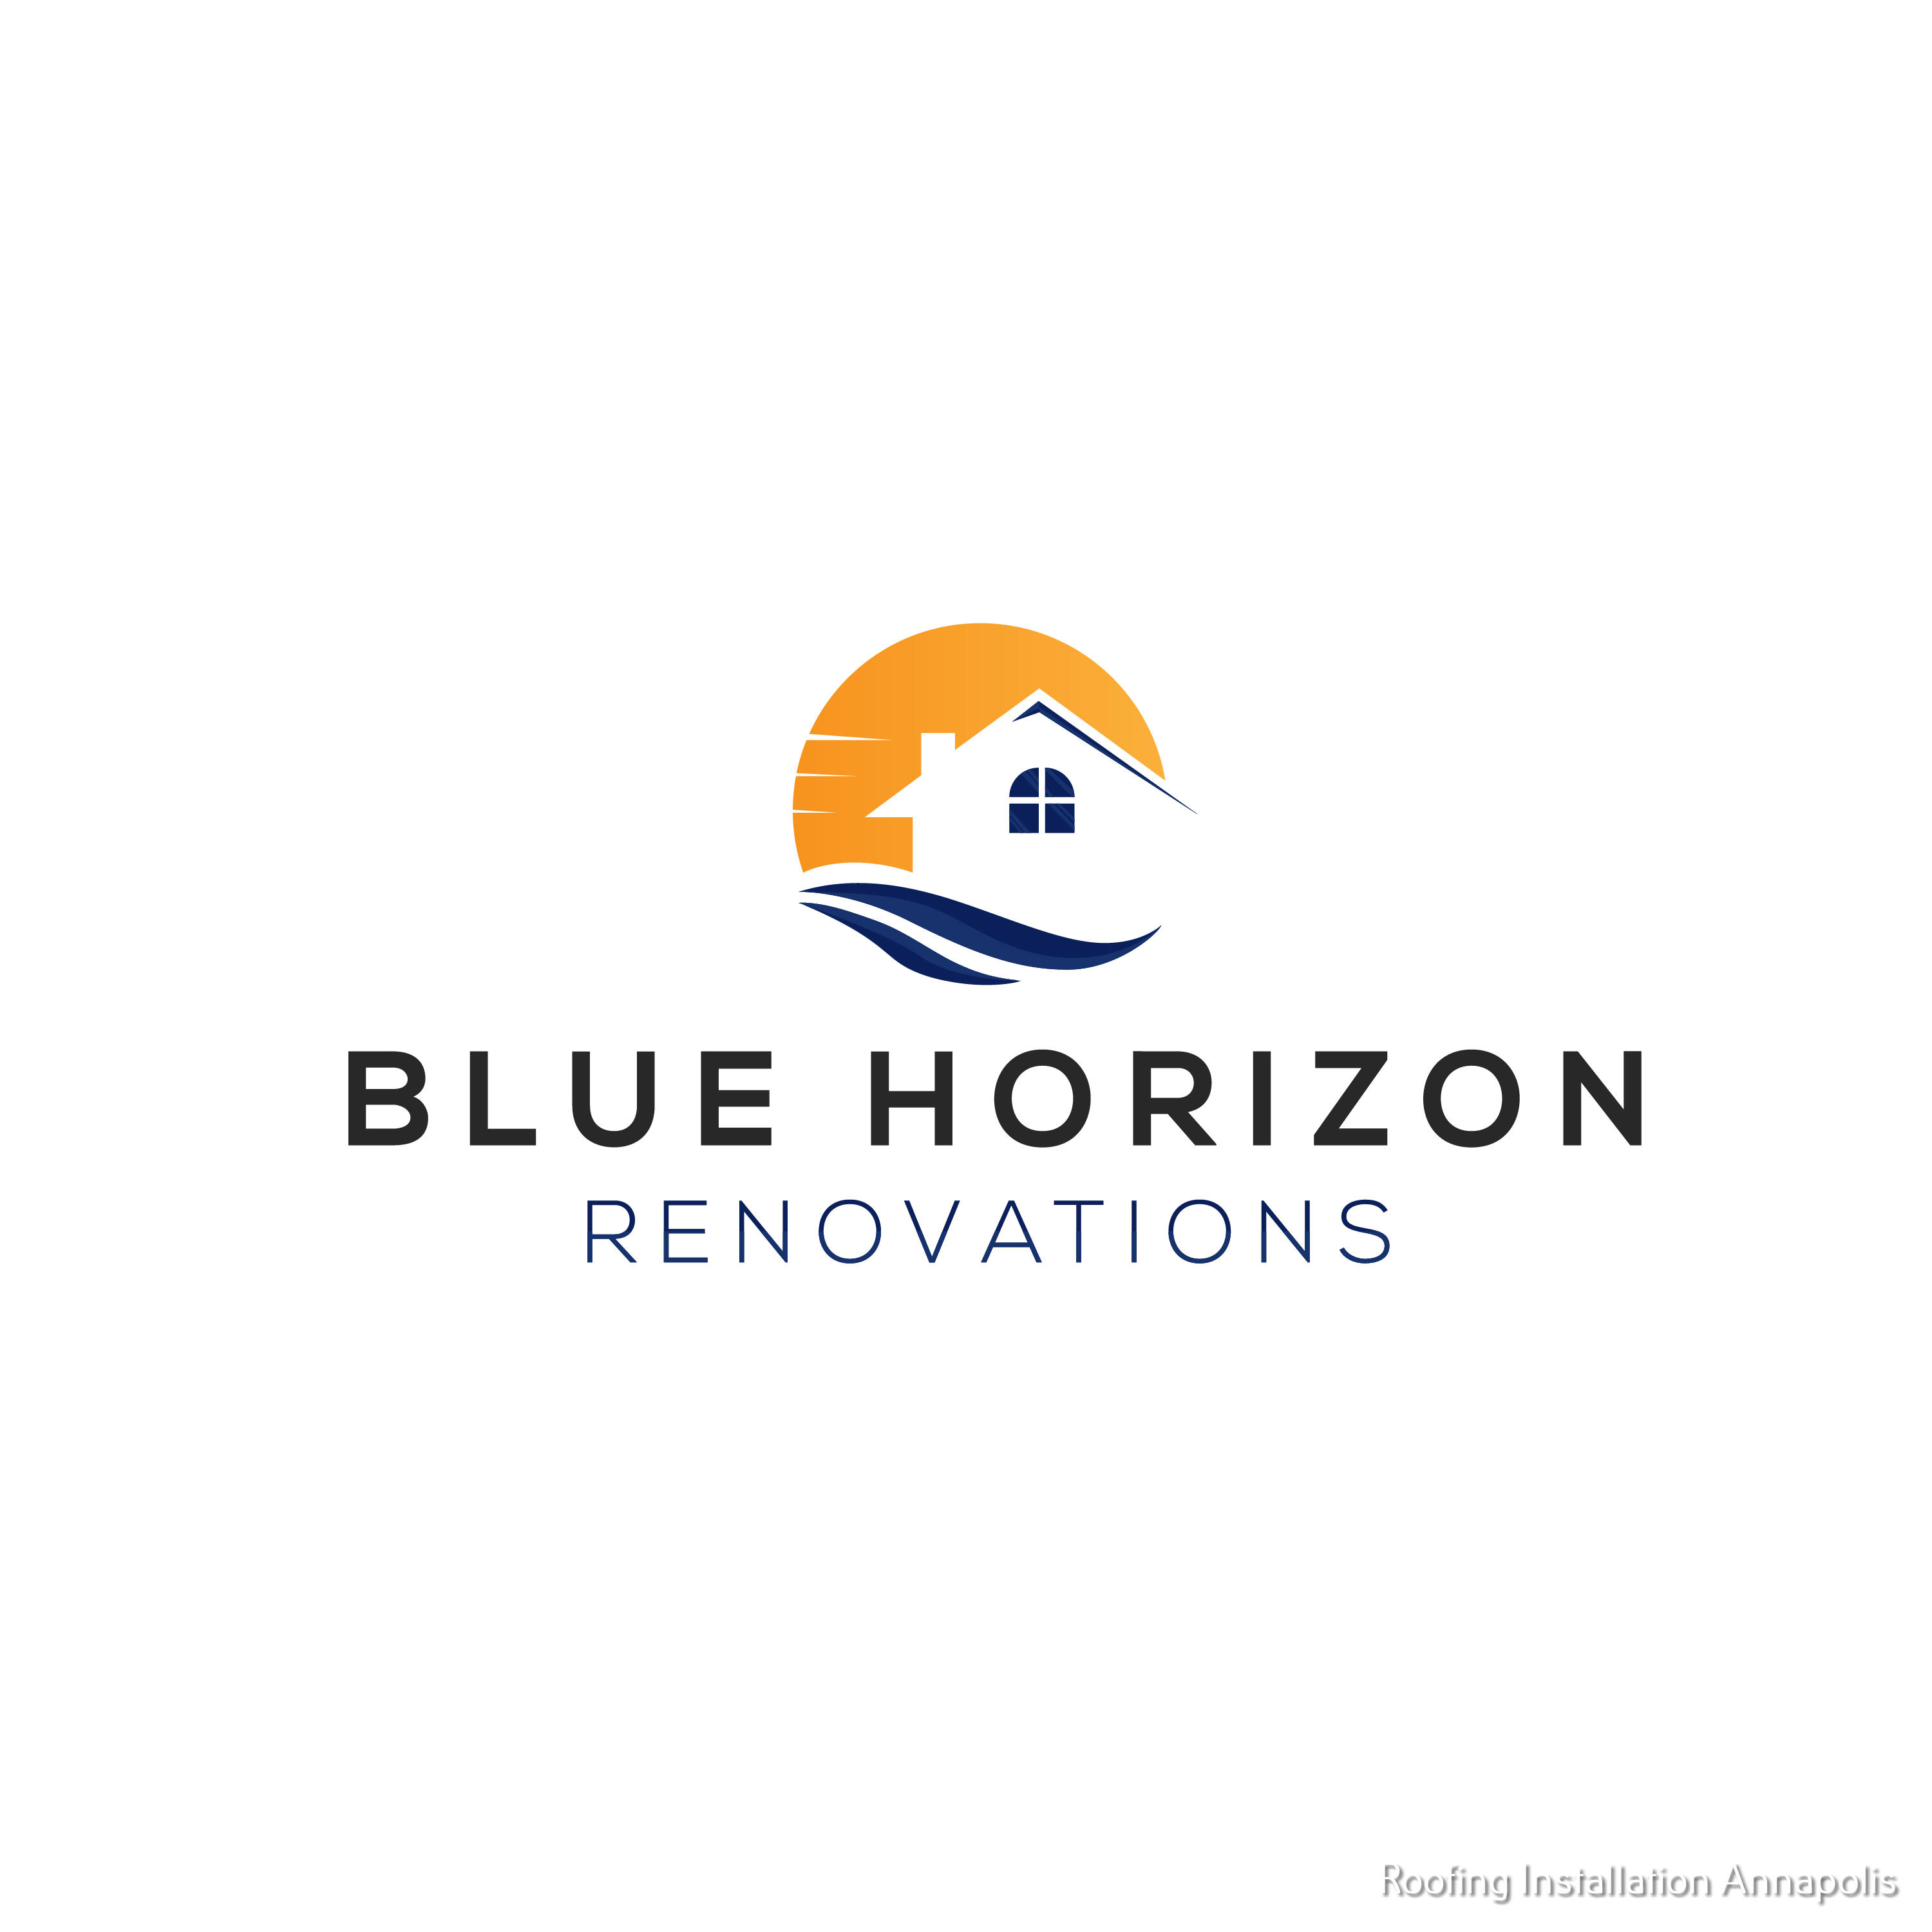 Blue Horizon Renovations Outlines What Separates Them from Other Companies 